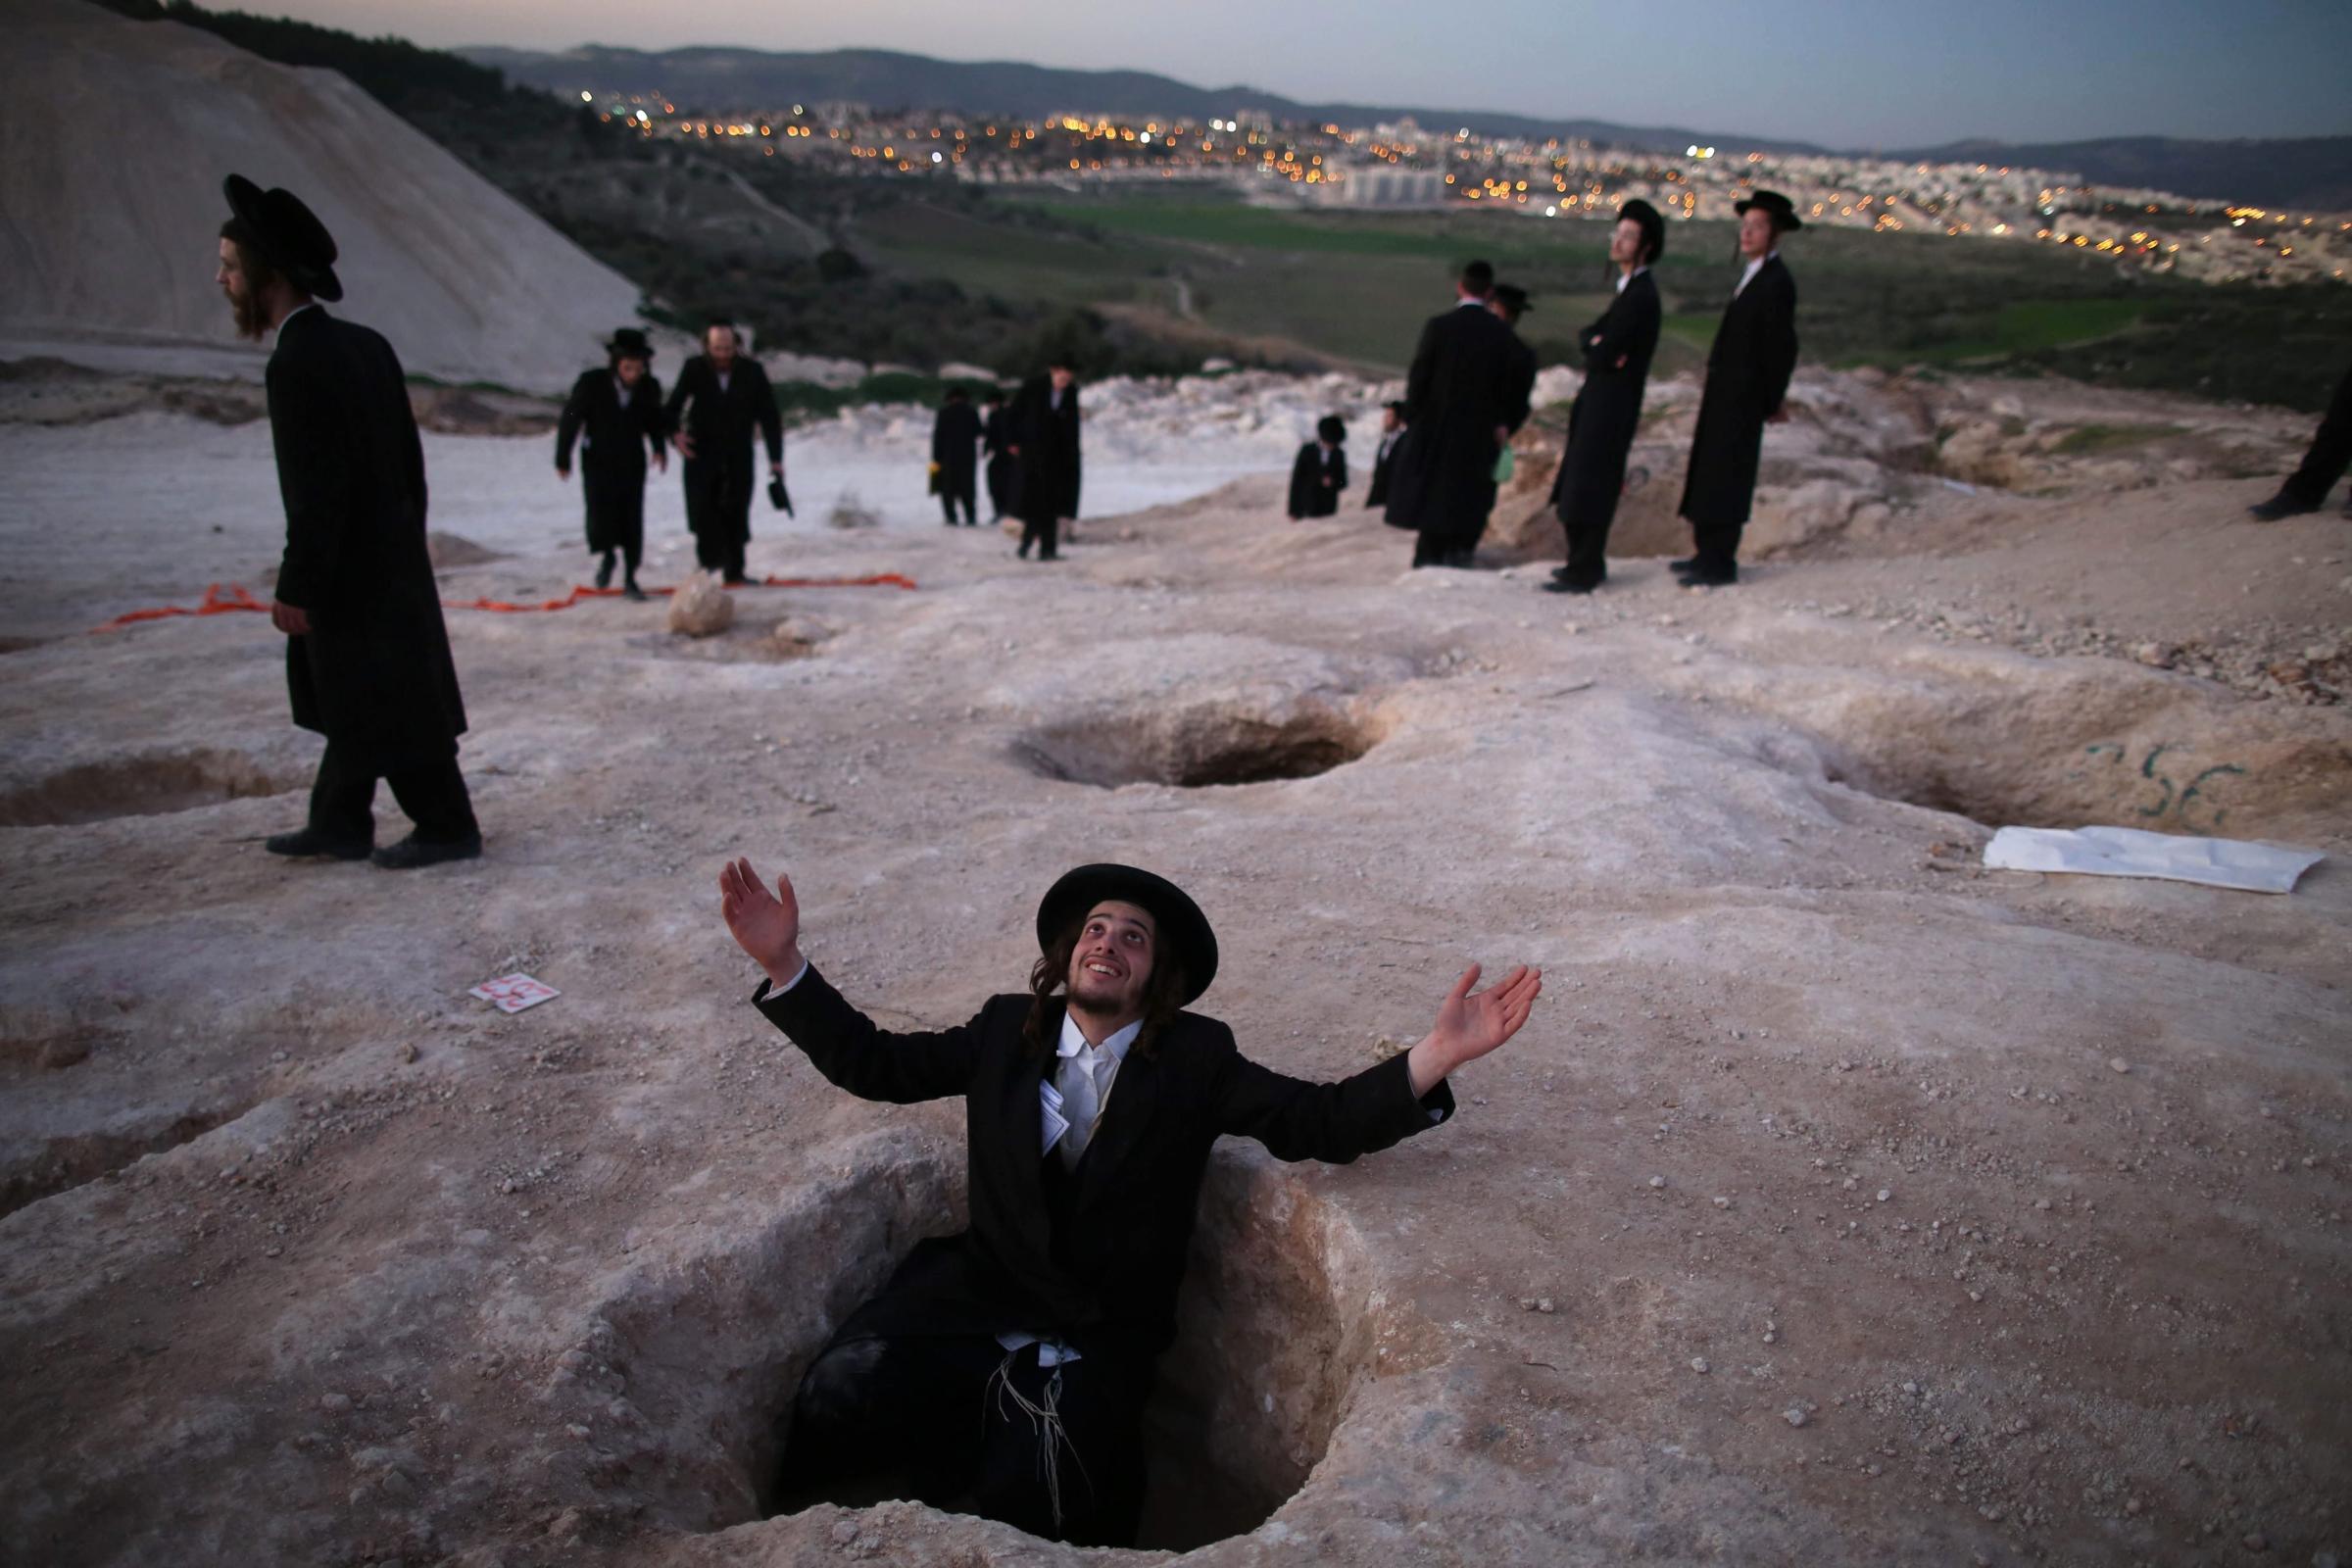 An Ultra-Orthodox Jewish man sits in a hole and prays during a demonstration in Beit Shemesh, Israel, Feb. 12, 2014. Hundreds of Ultra-Orthodox Jews protested against the construction of new housing units, believing they would be built at the site of ancient Jewish graves.